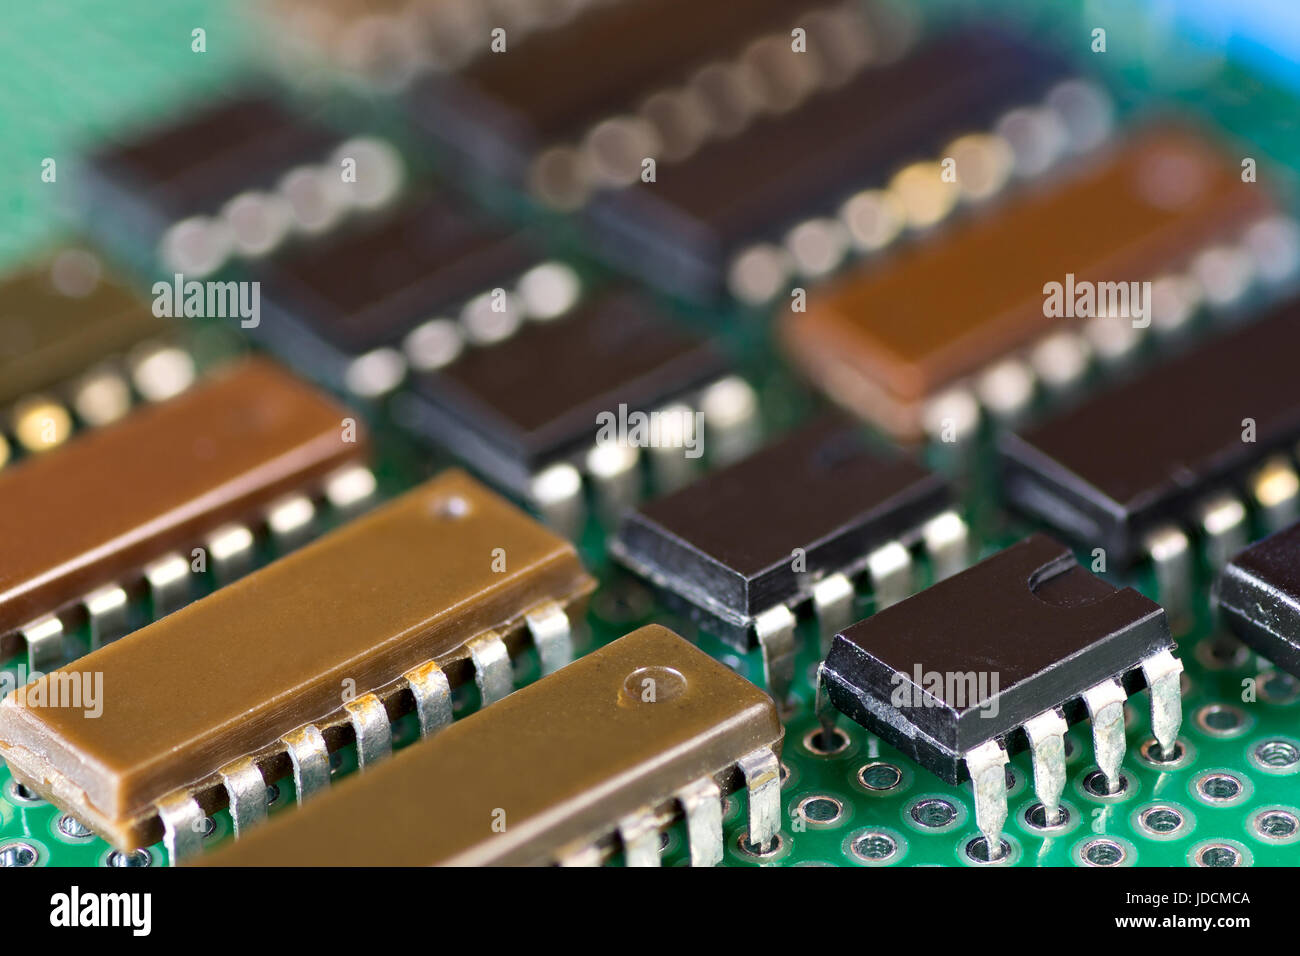 Rows of integral circuits on Printed Circuit Board close-up Stock Photo